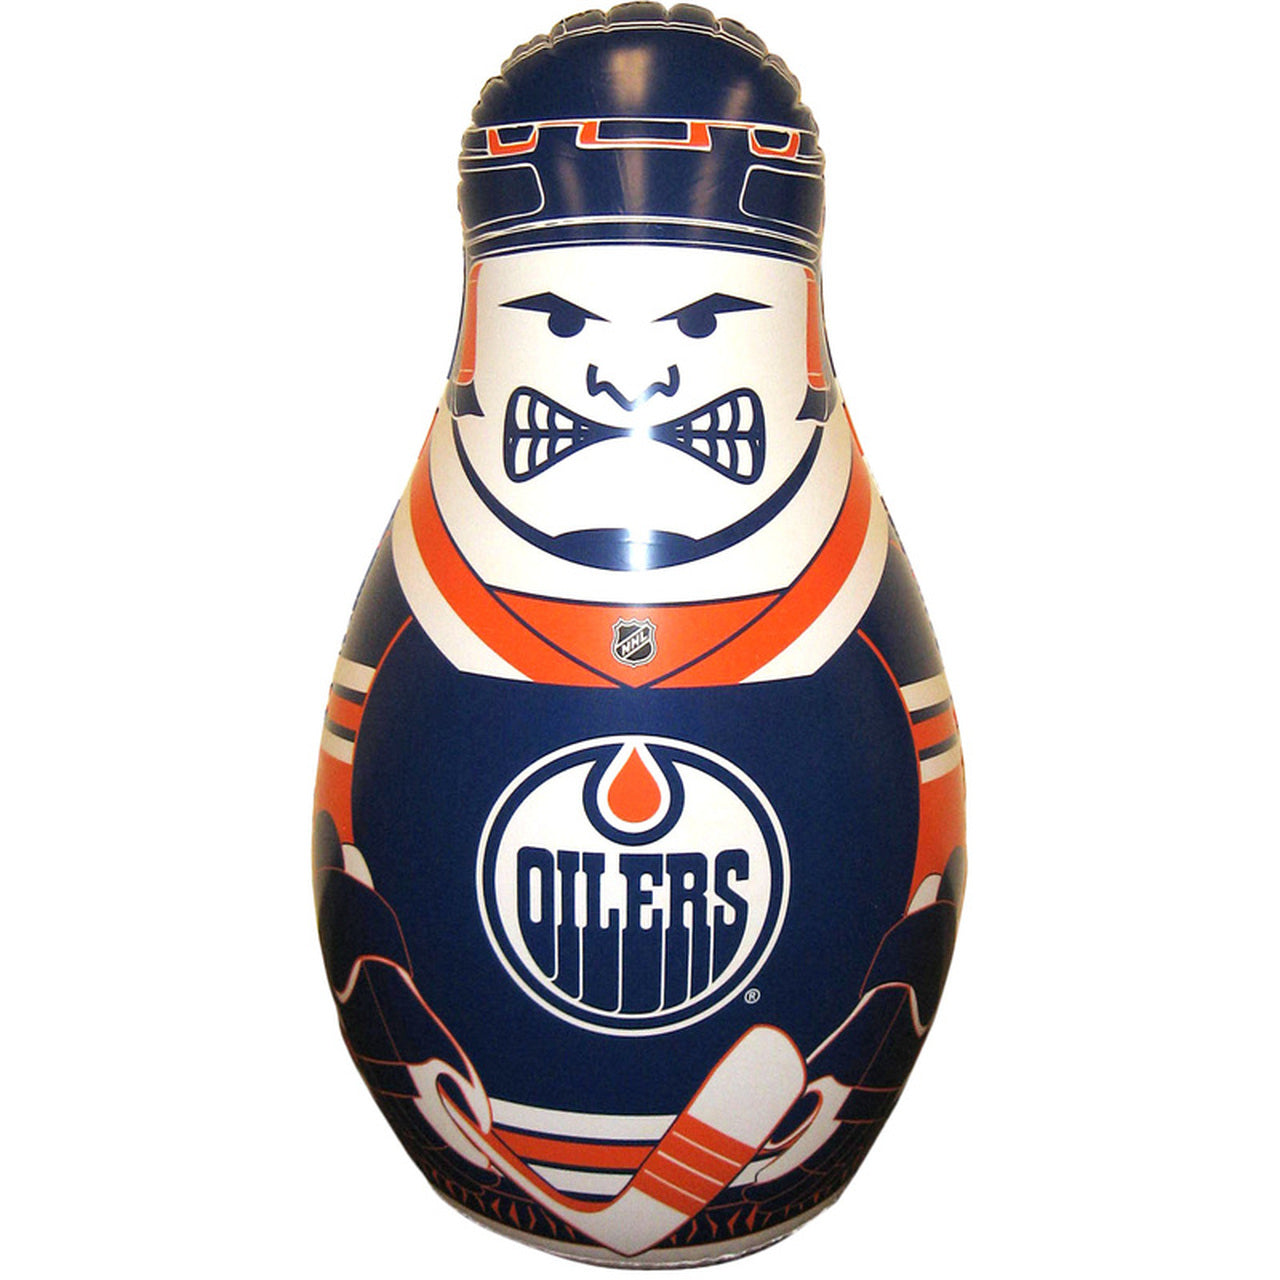 Kids inflatable toy punching bag with Edmonton Oilers hockey player graphics